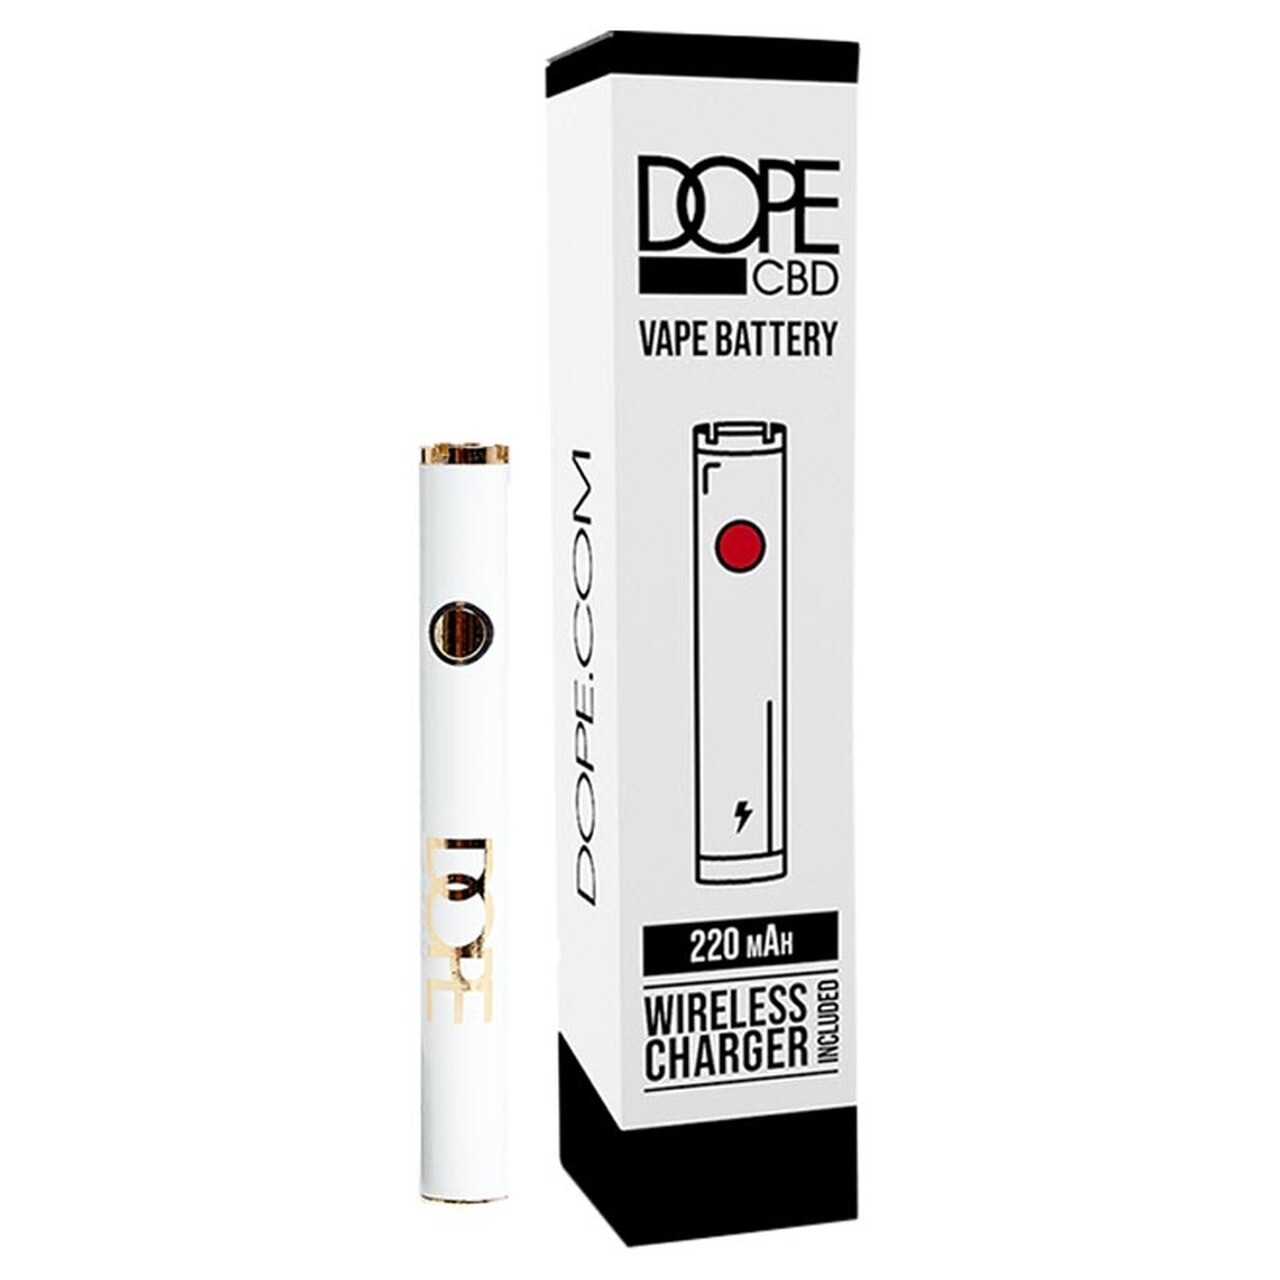 DOPE - Vape Battery with cord. 